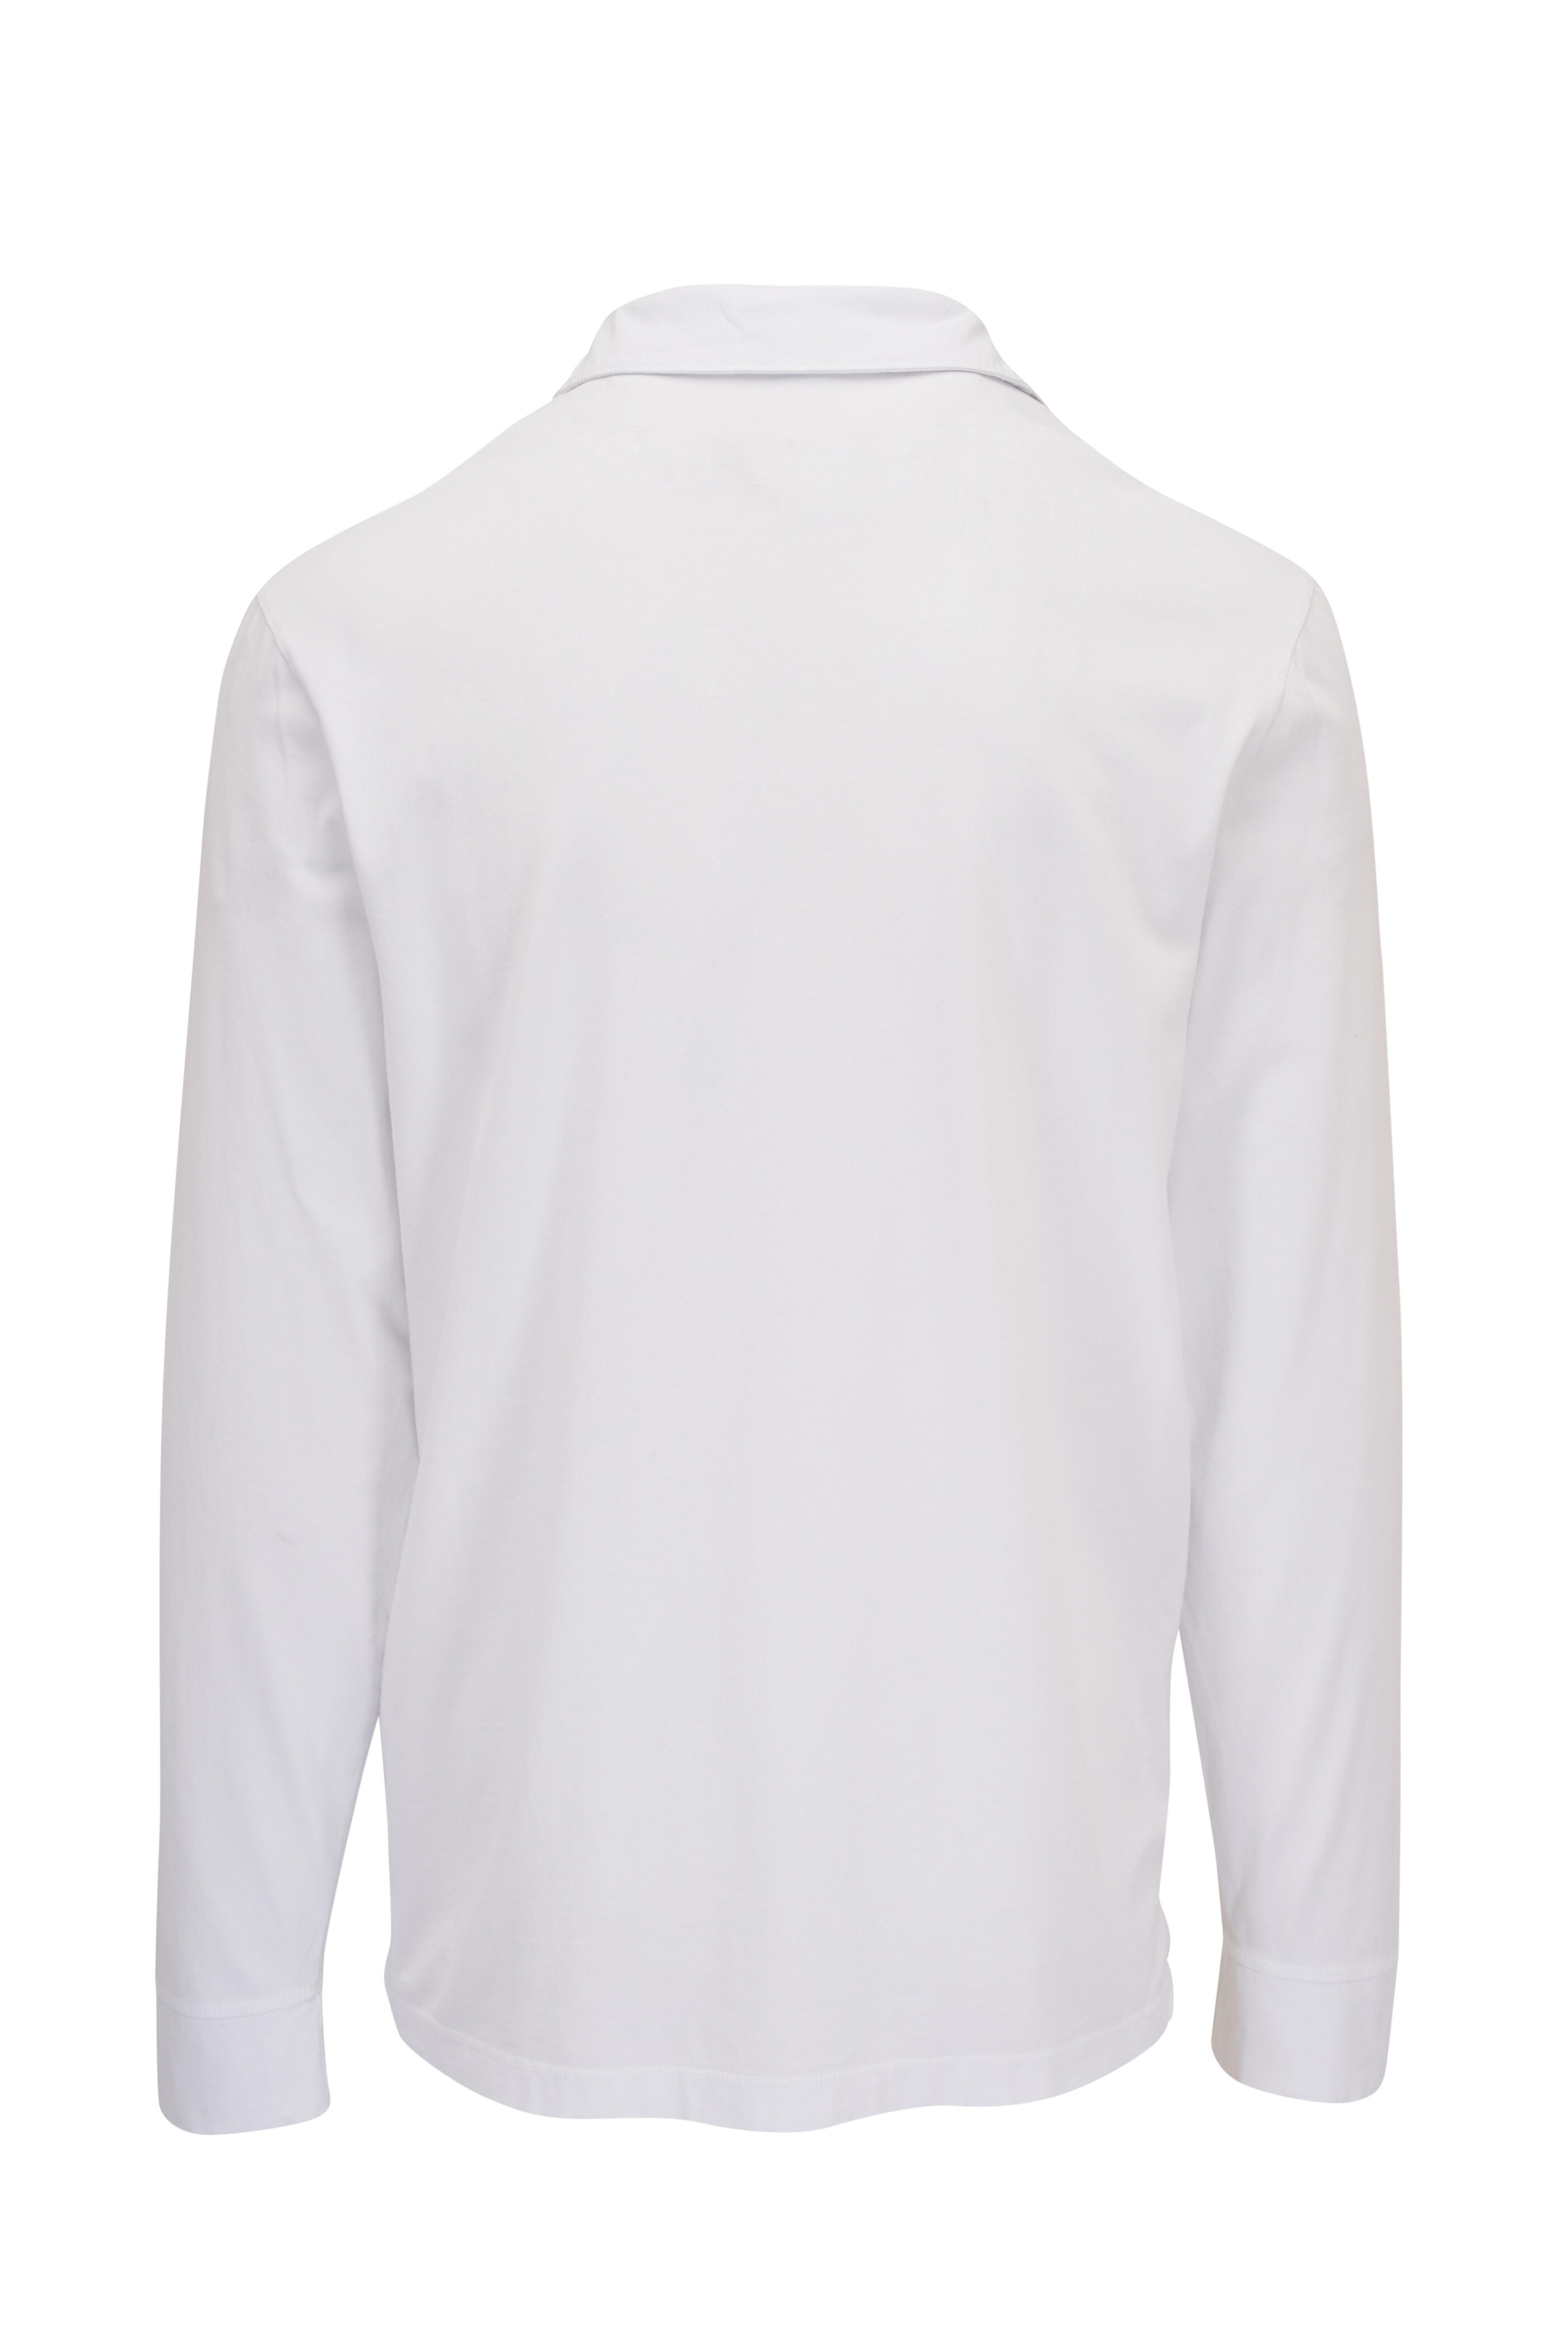 James Perse - White Sueded Jersey Rugby Polo | Mitchell Stores